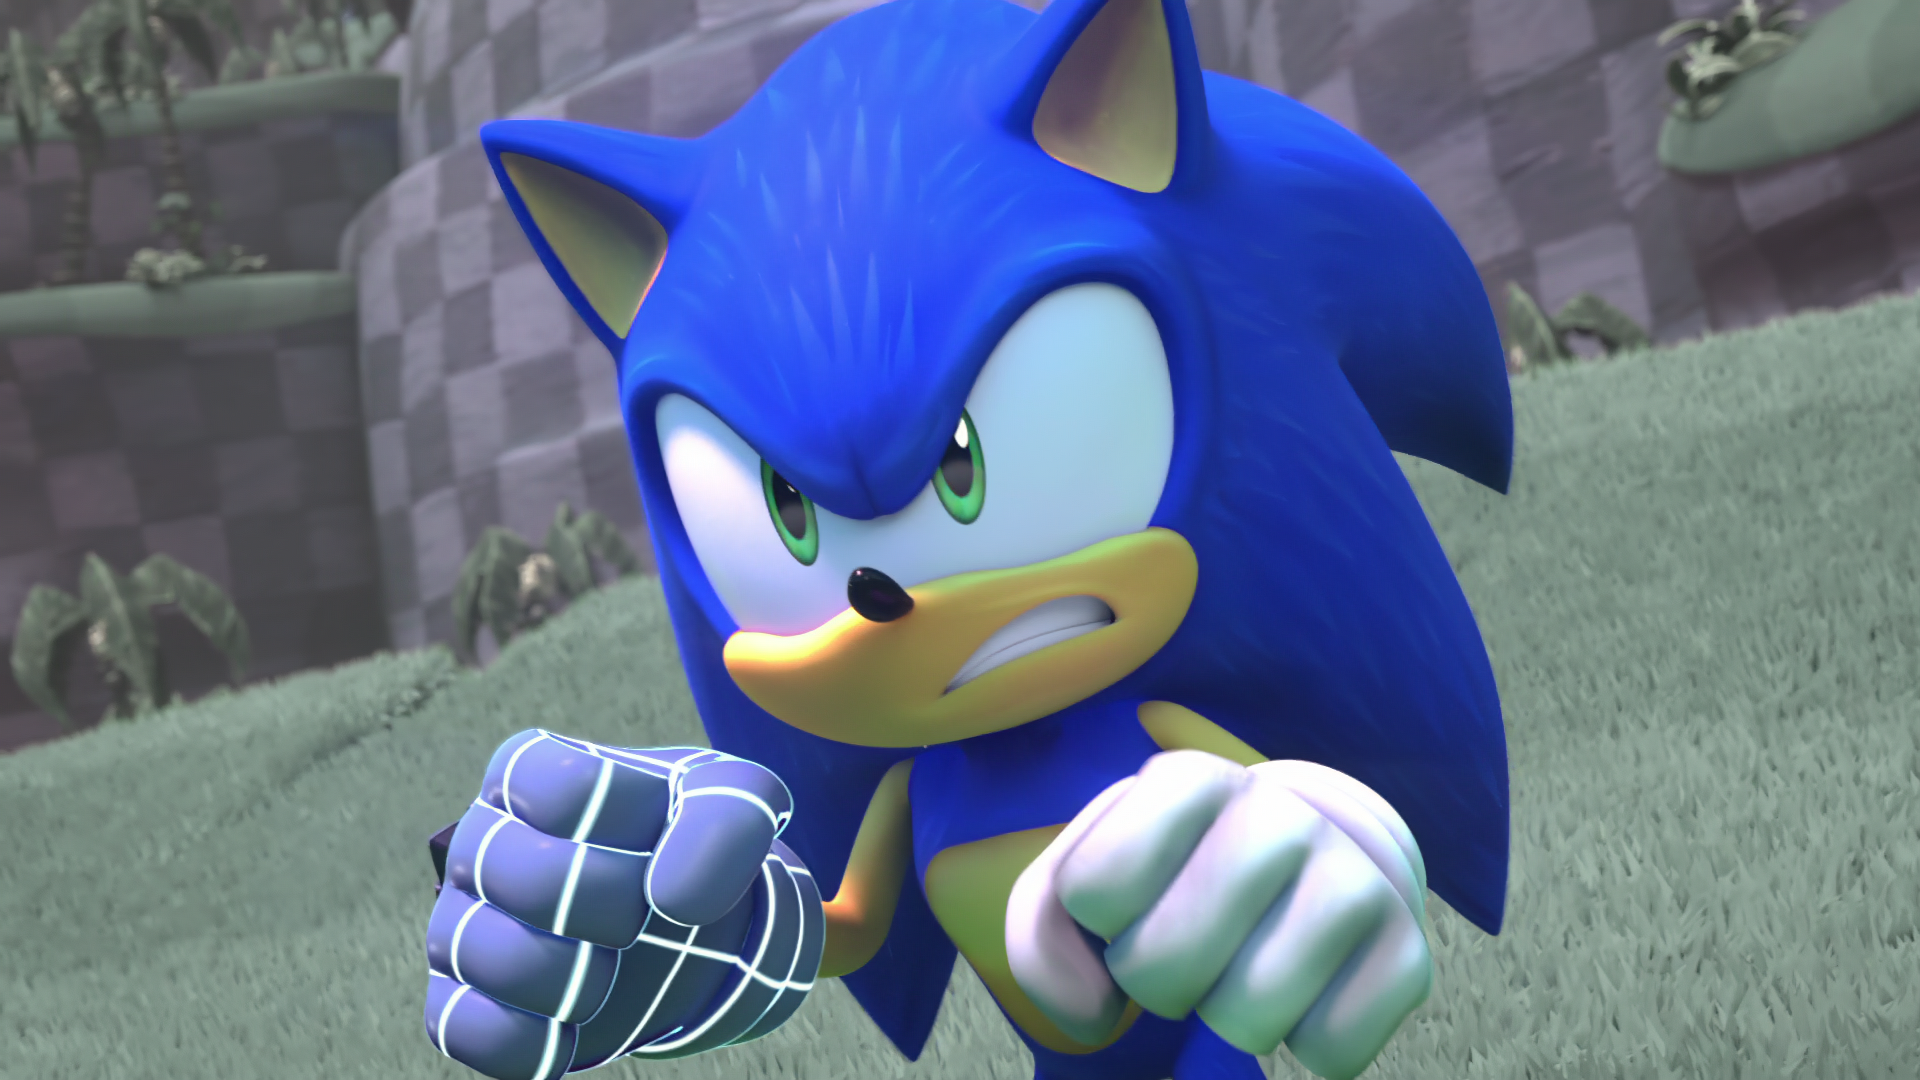 Sonic The Hedgeblog on X: Part of the Sonic Prime event also